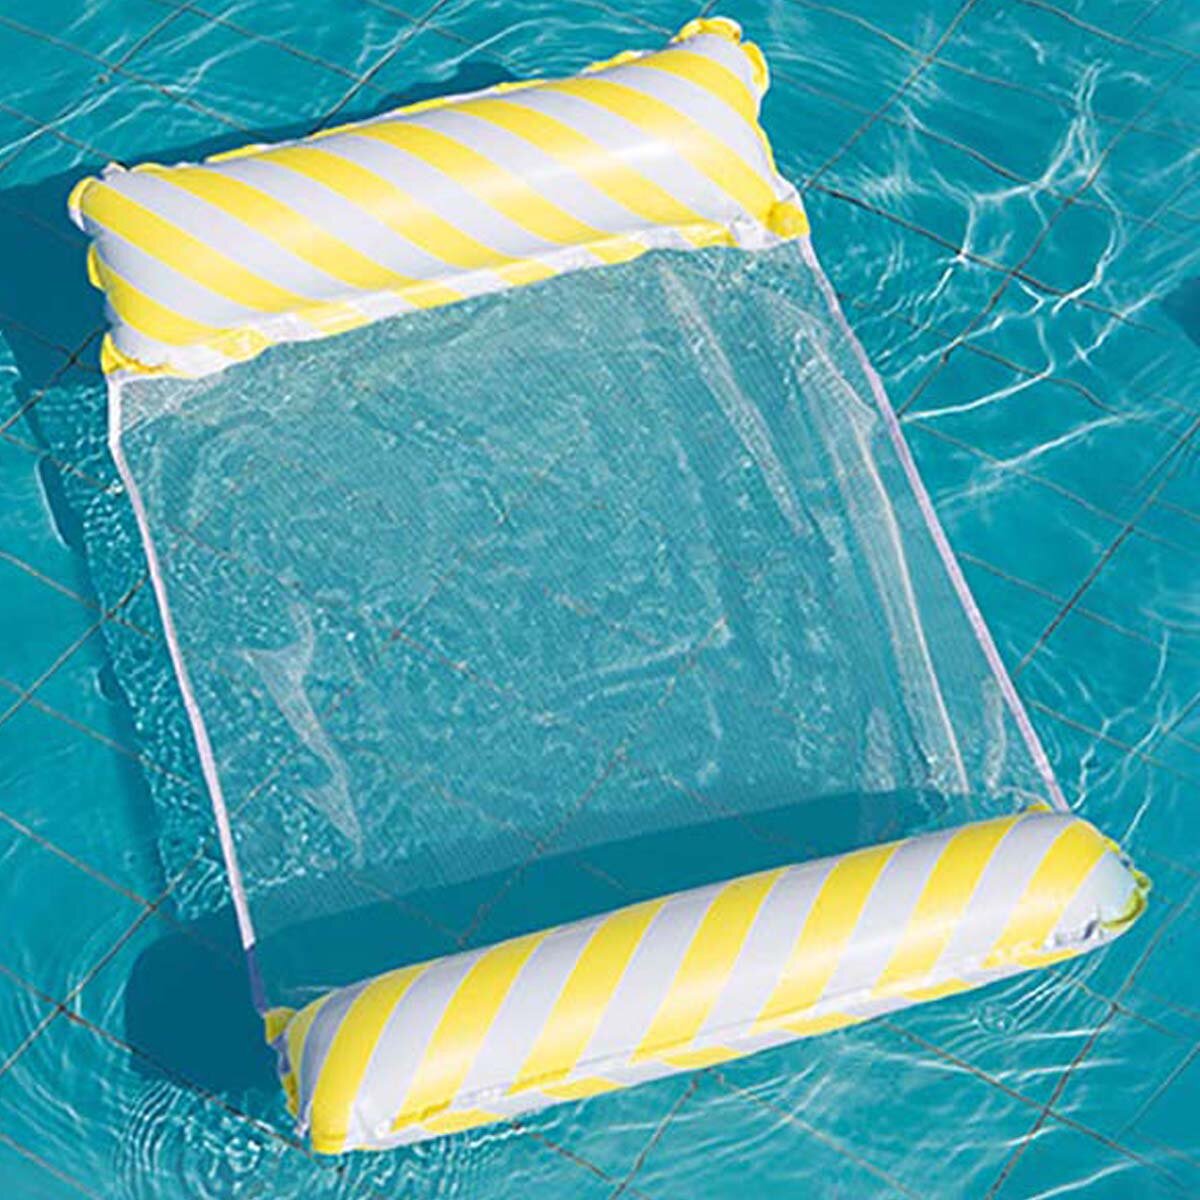 122x70cm Swimming Inflatable Mattress Water Float Hammock Floating Bed Chair Toy Swimming Pools Training Equipment